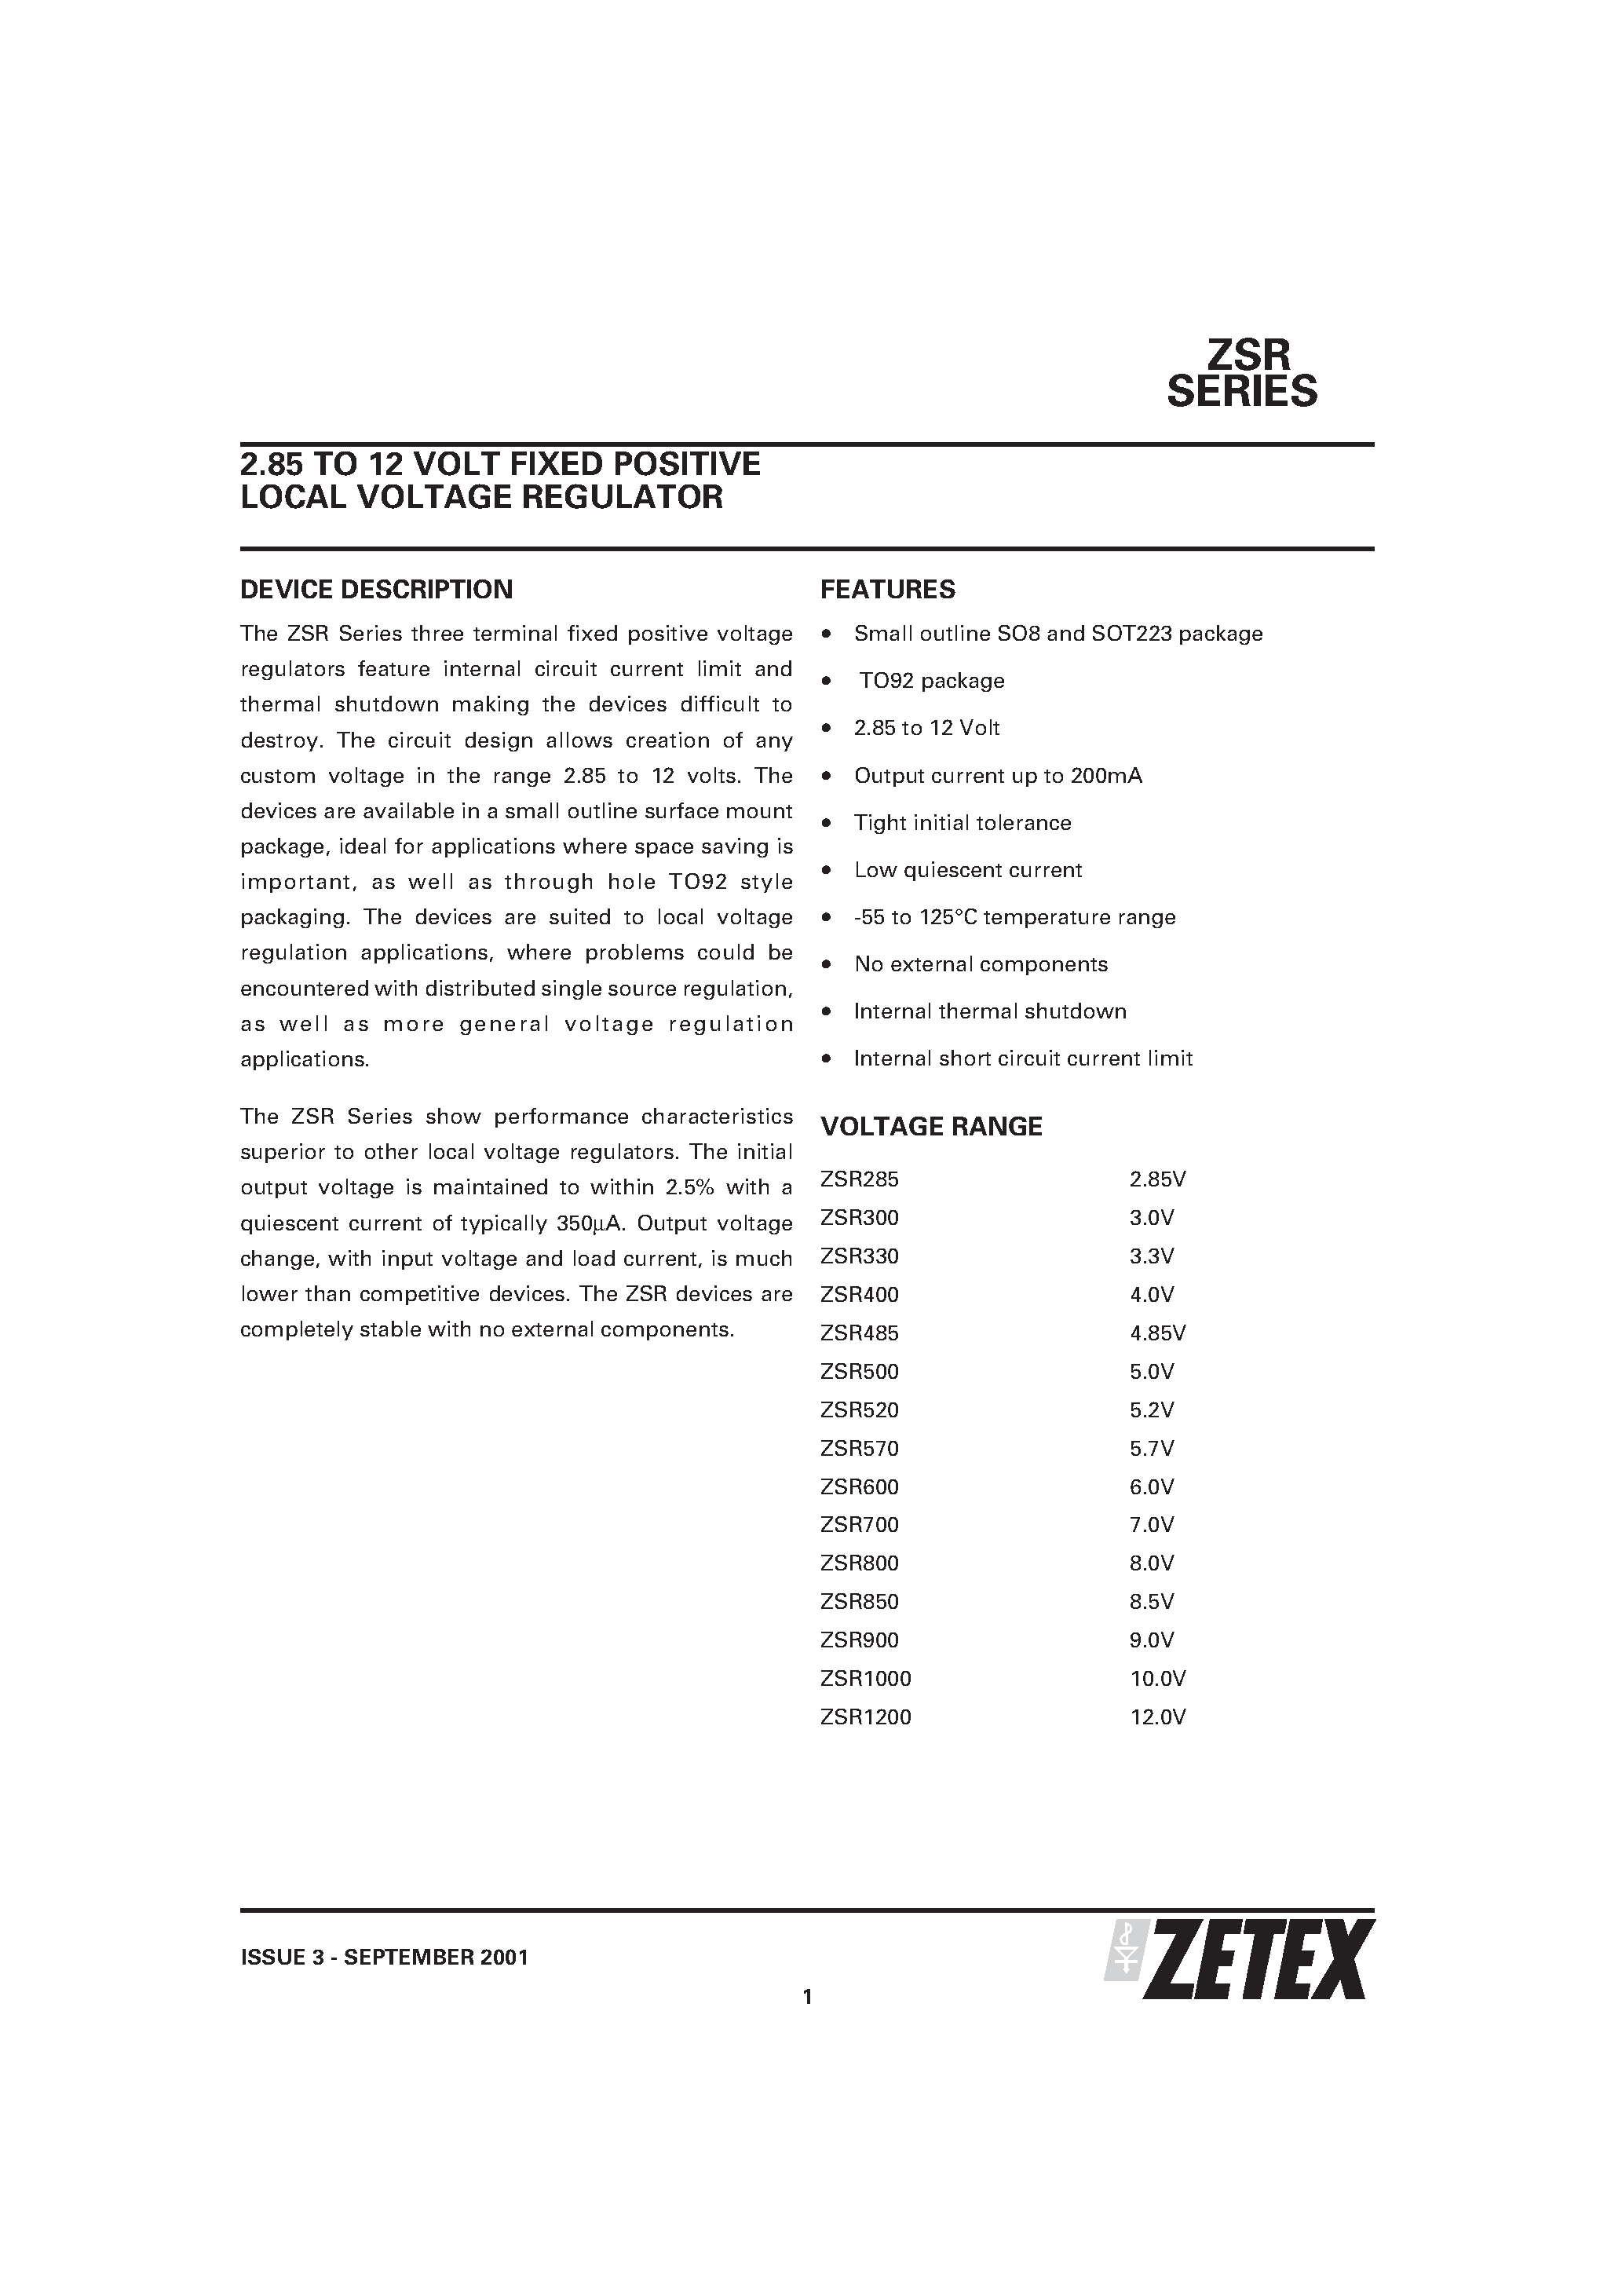 Datasheet ZSR500 - 2.85 TO 12 VOLT FIXED POSITIVE LOCAL VOLTAGE REGULATOR page 1